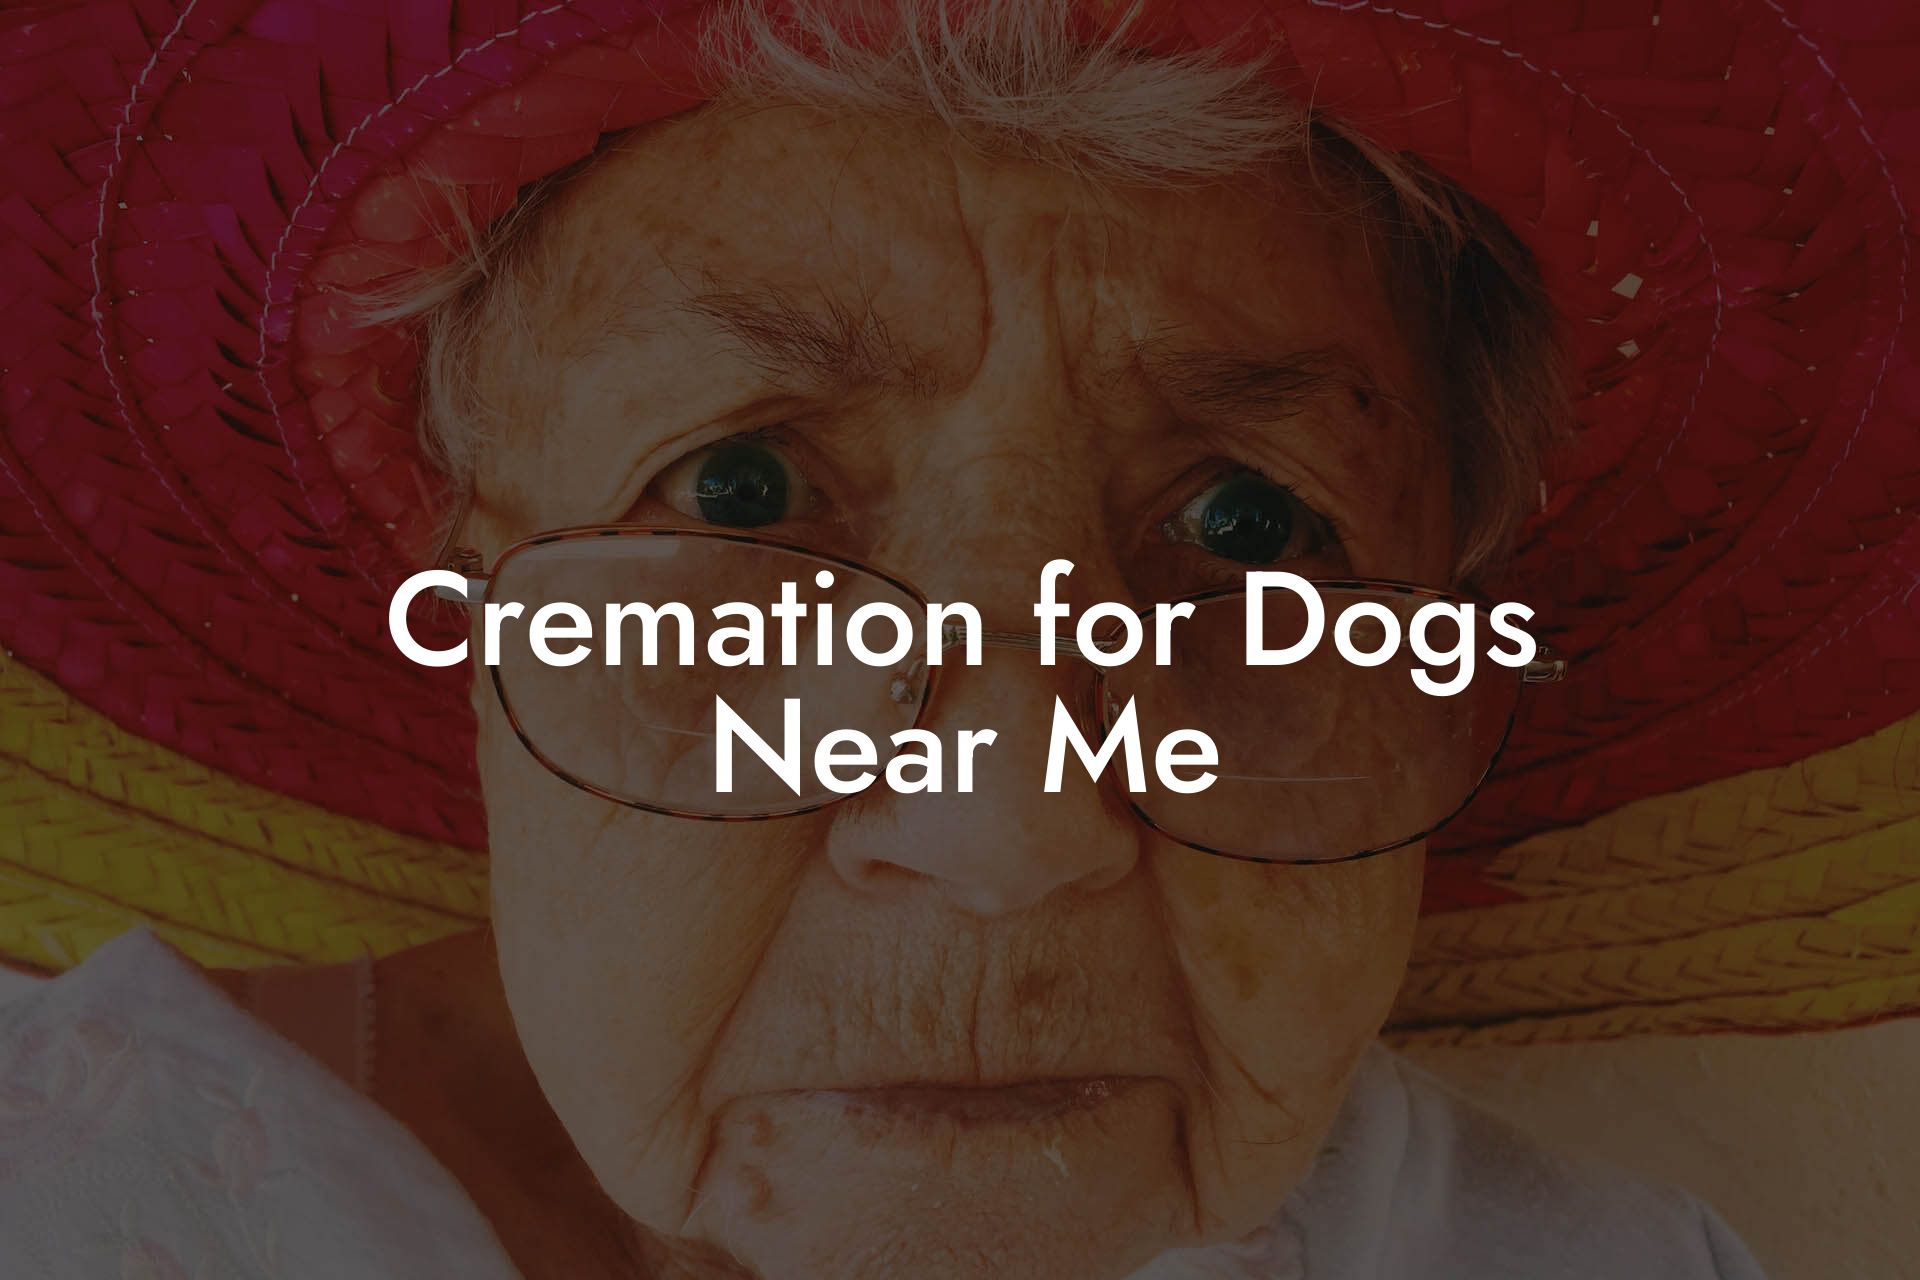 Cremation for Dogs Near Me